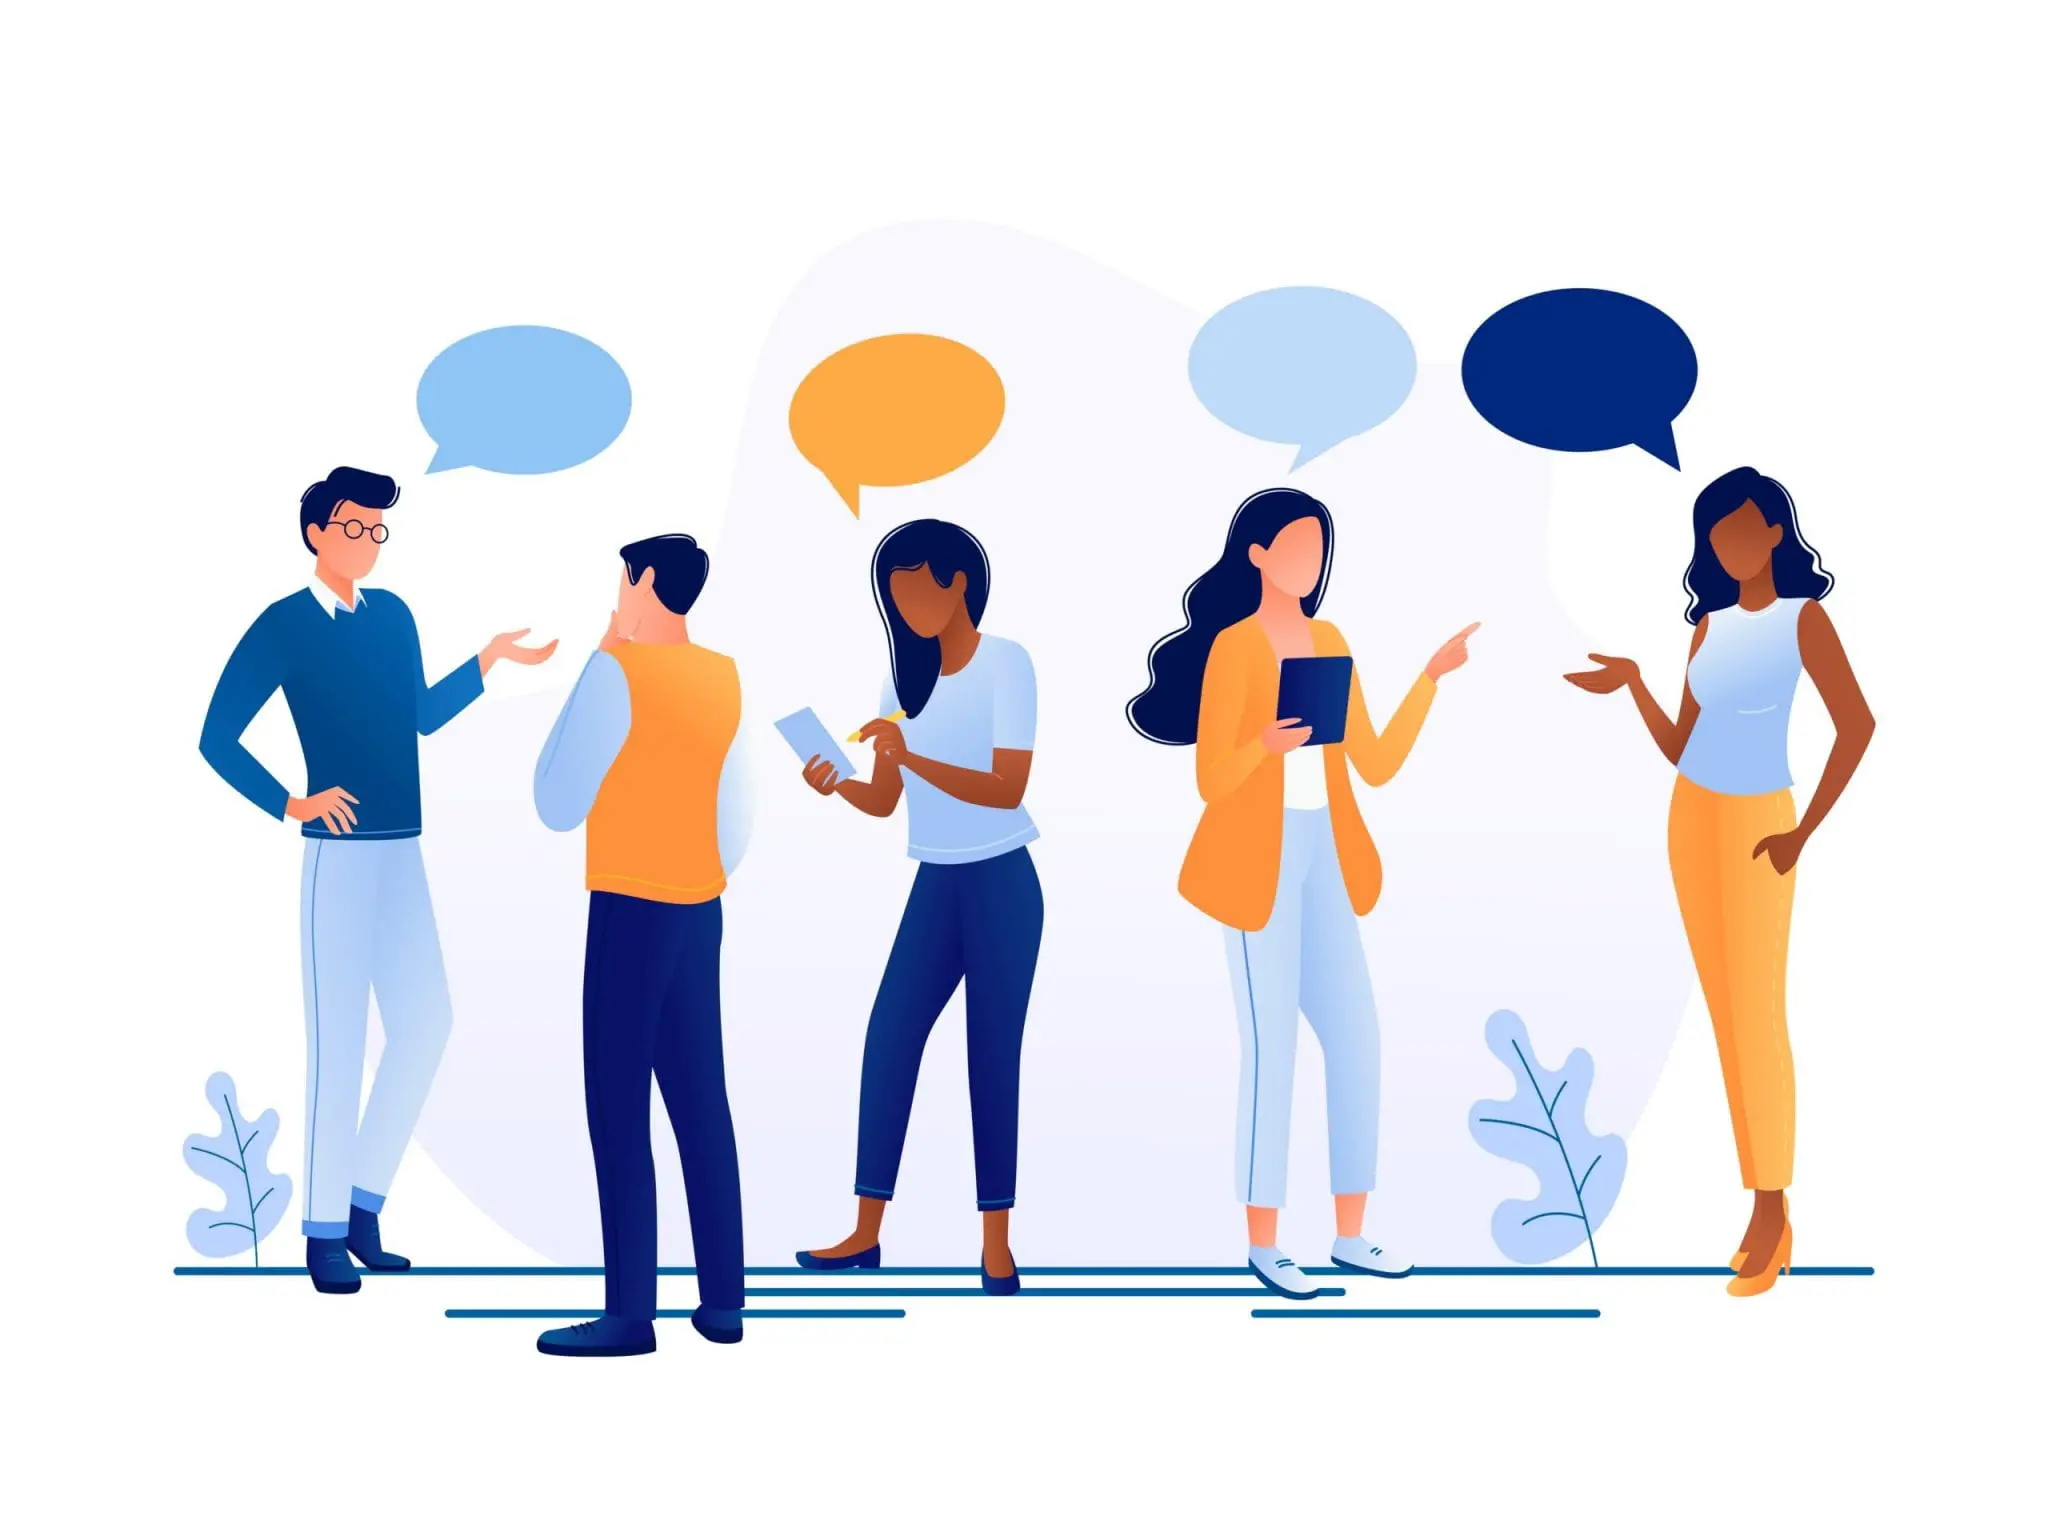 Brainstorming. People Talking Together. Businessmen and Women Discuss Social Networks, News. Chat, Dialogue Speech Bubbles. Teamwork, Searching for Idea. Flat Concept Vector Illustration.